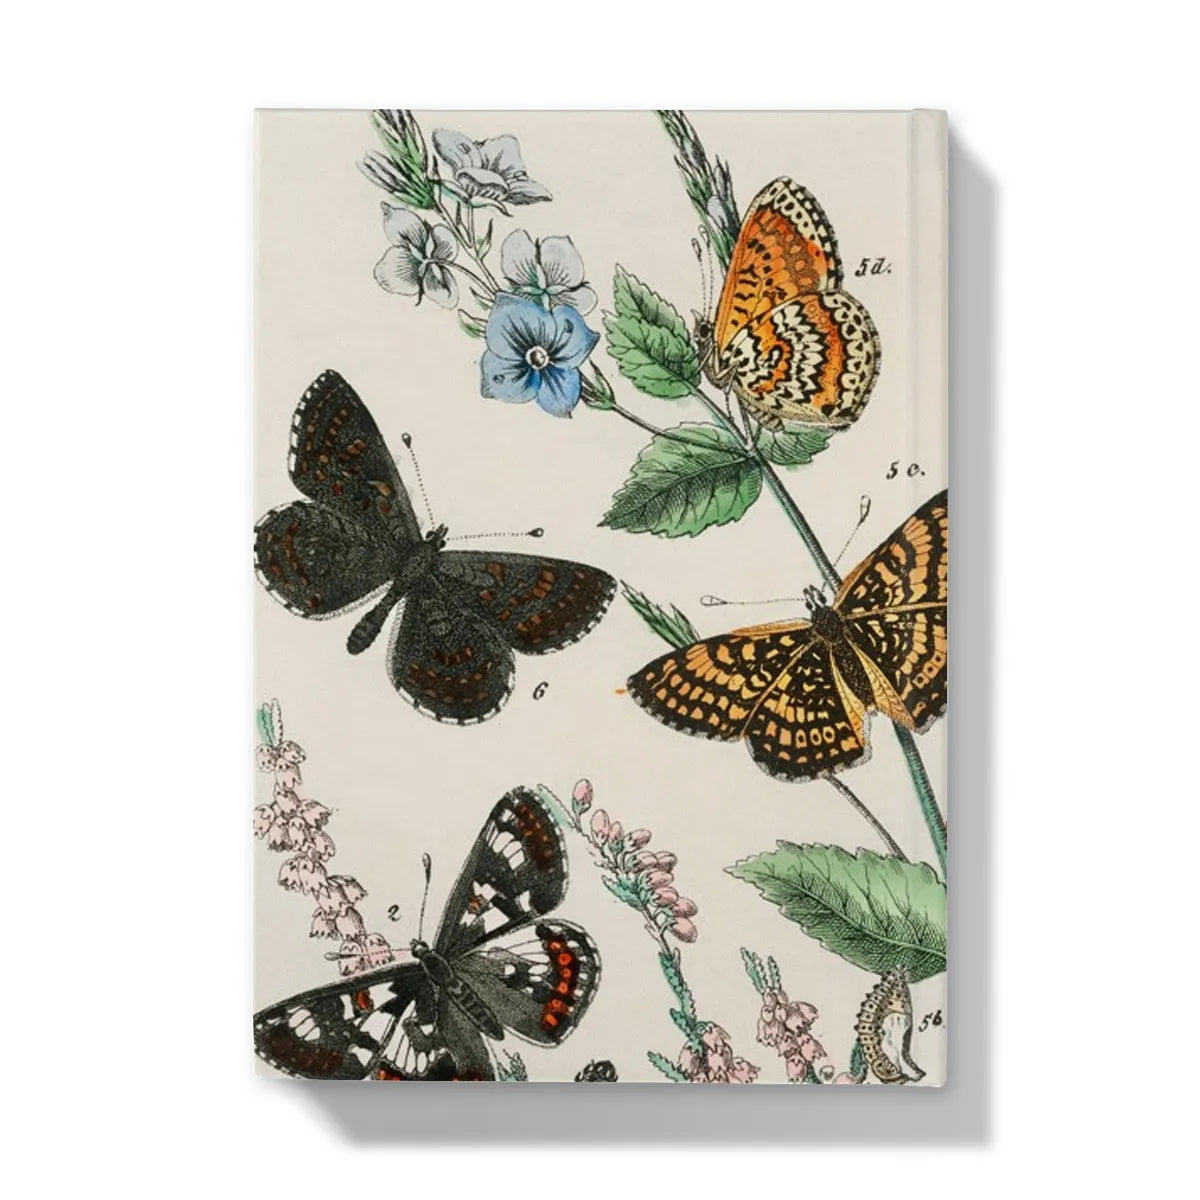 European Butterflies And Moths 2 By William Forsell Kirby Hardback Journal - Notebooks & Notepads - Aesthetic Art